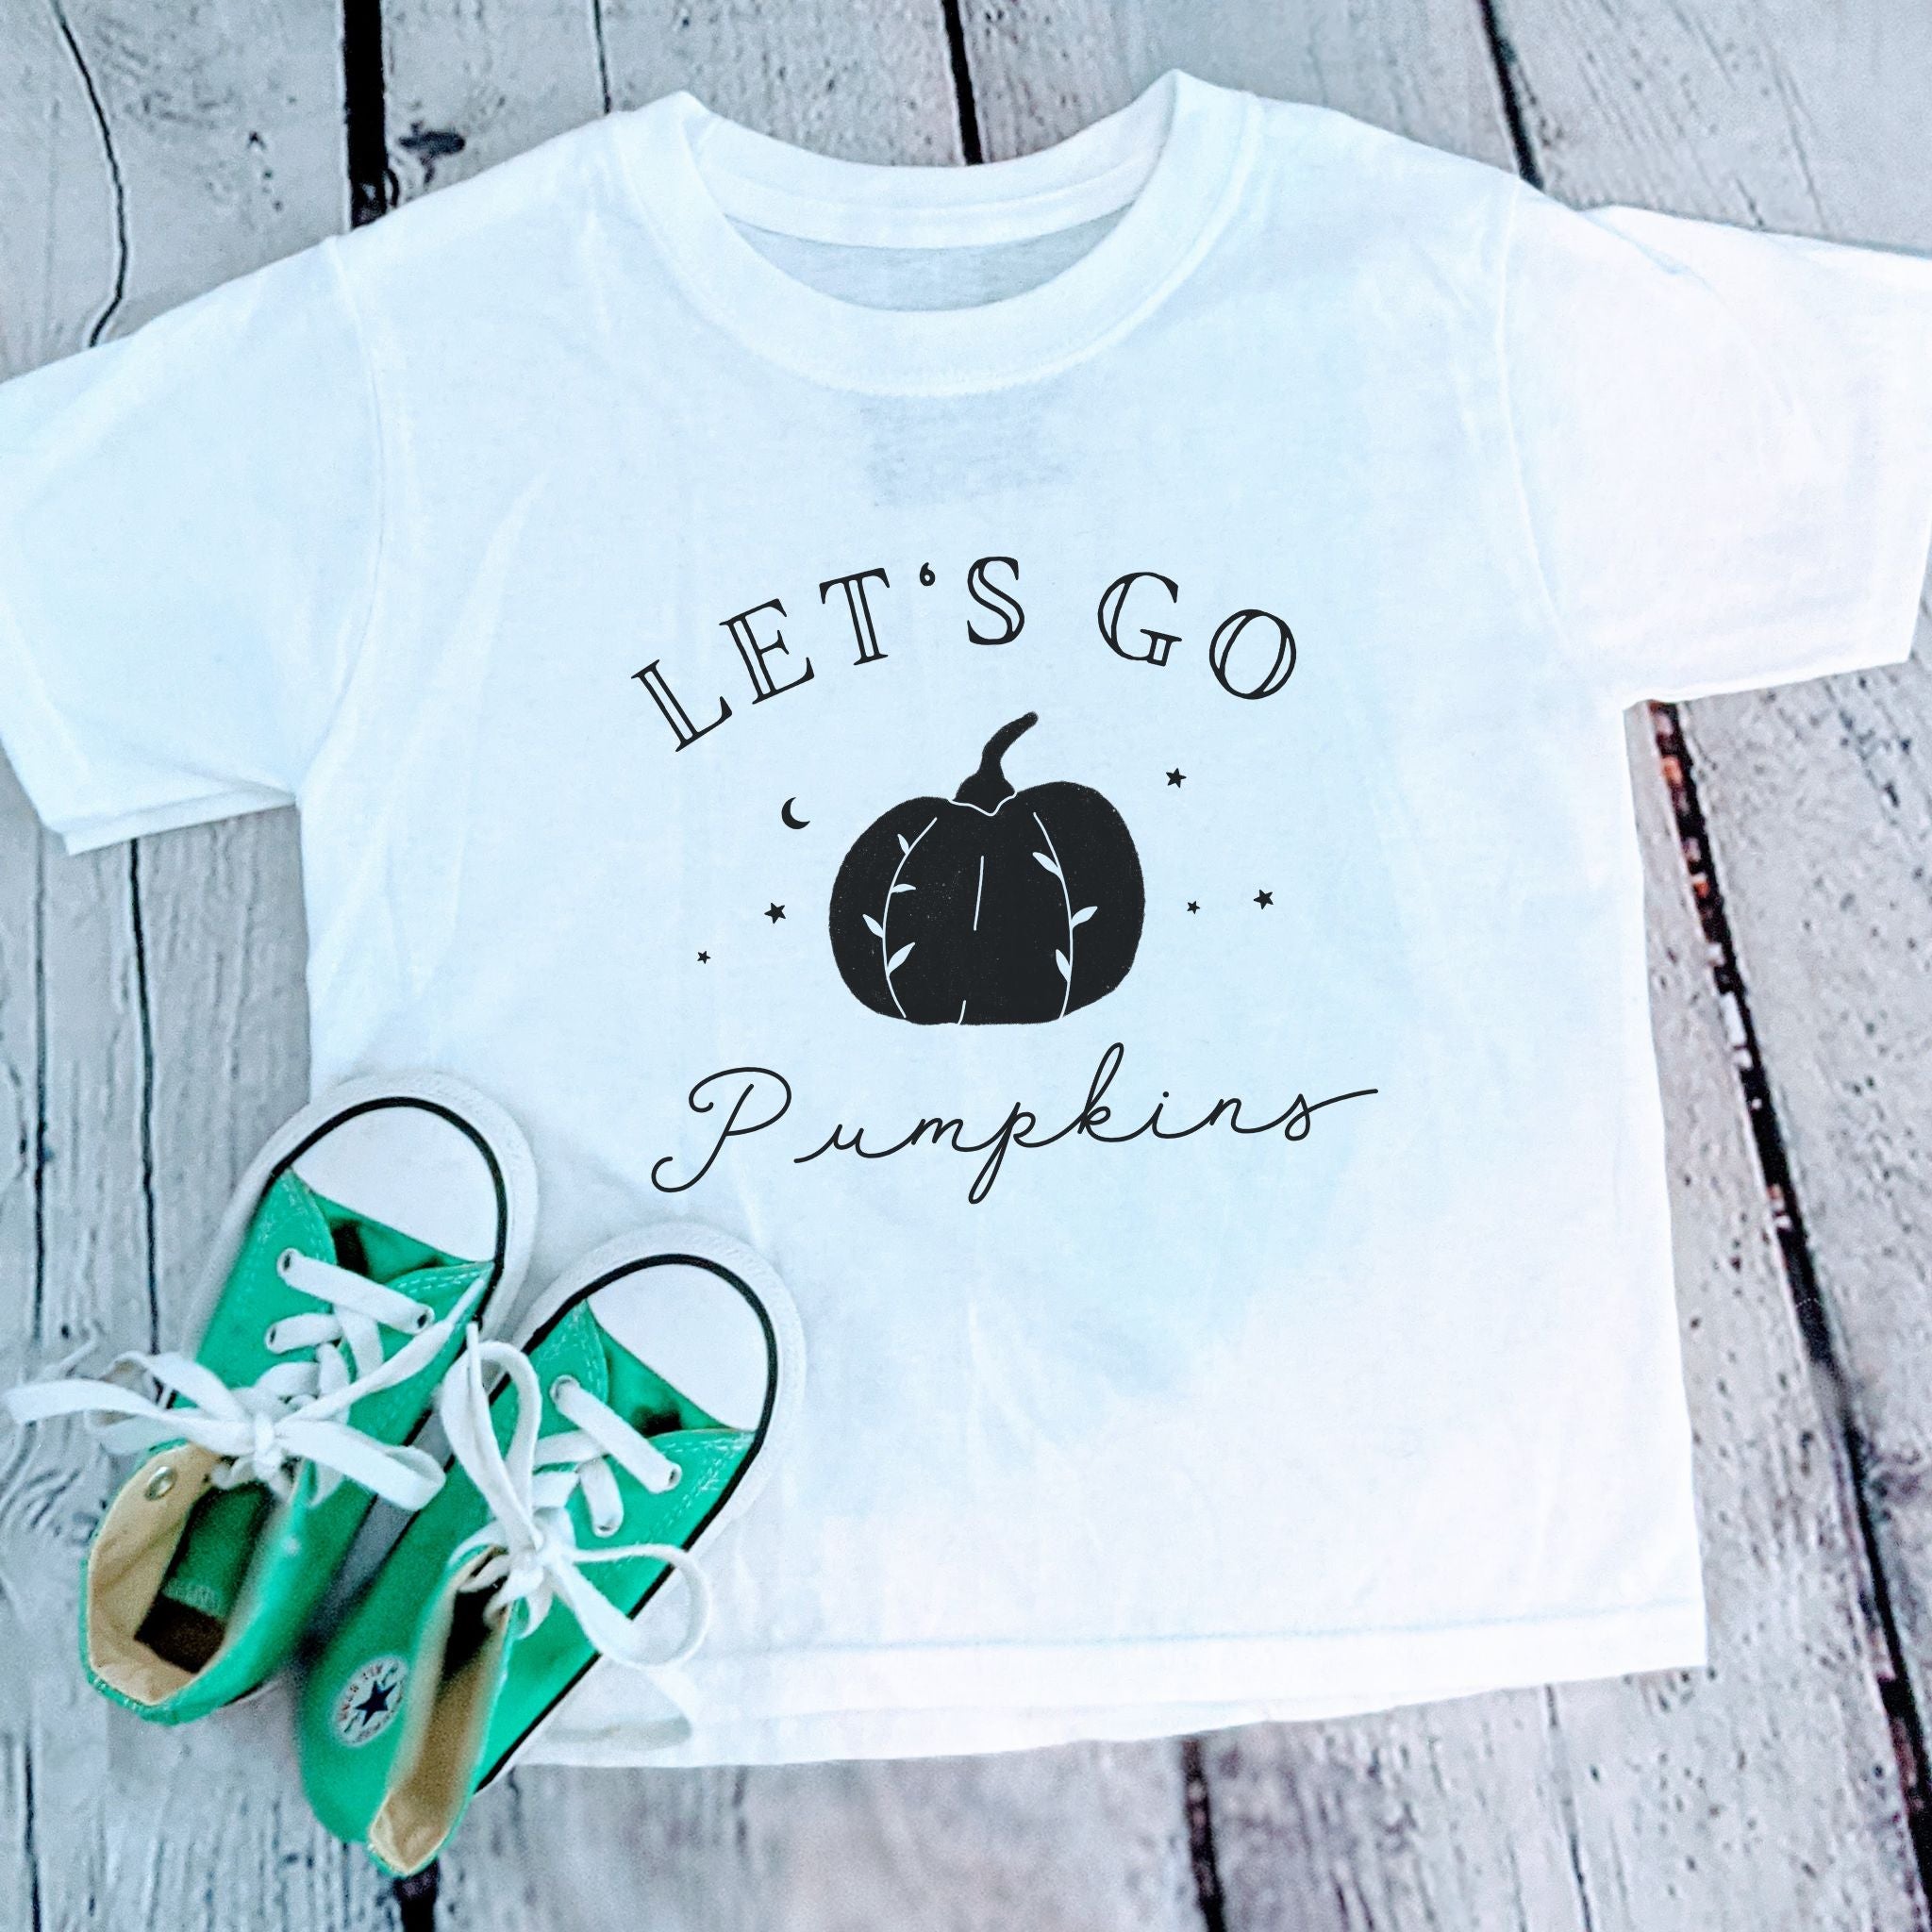 Let's Go Pumpkins - Youth Short Sleeve Tee - The Small Art Project - Modern Nursery Prints